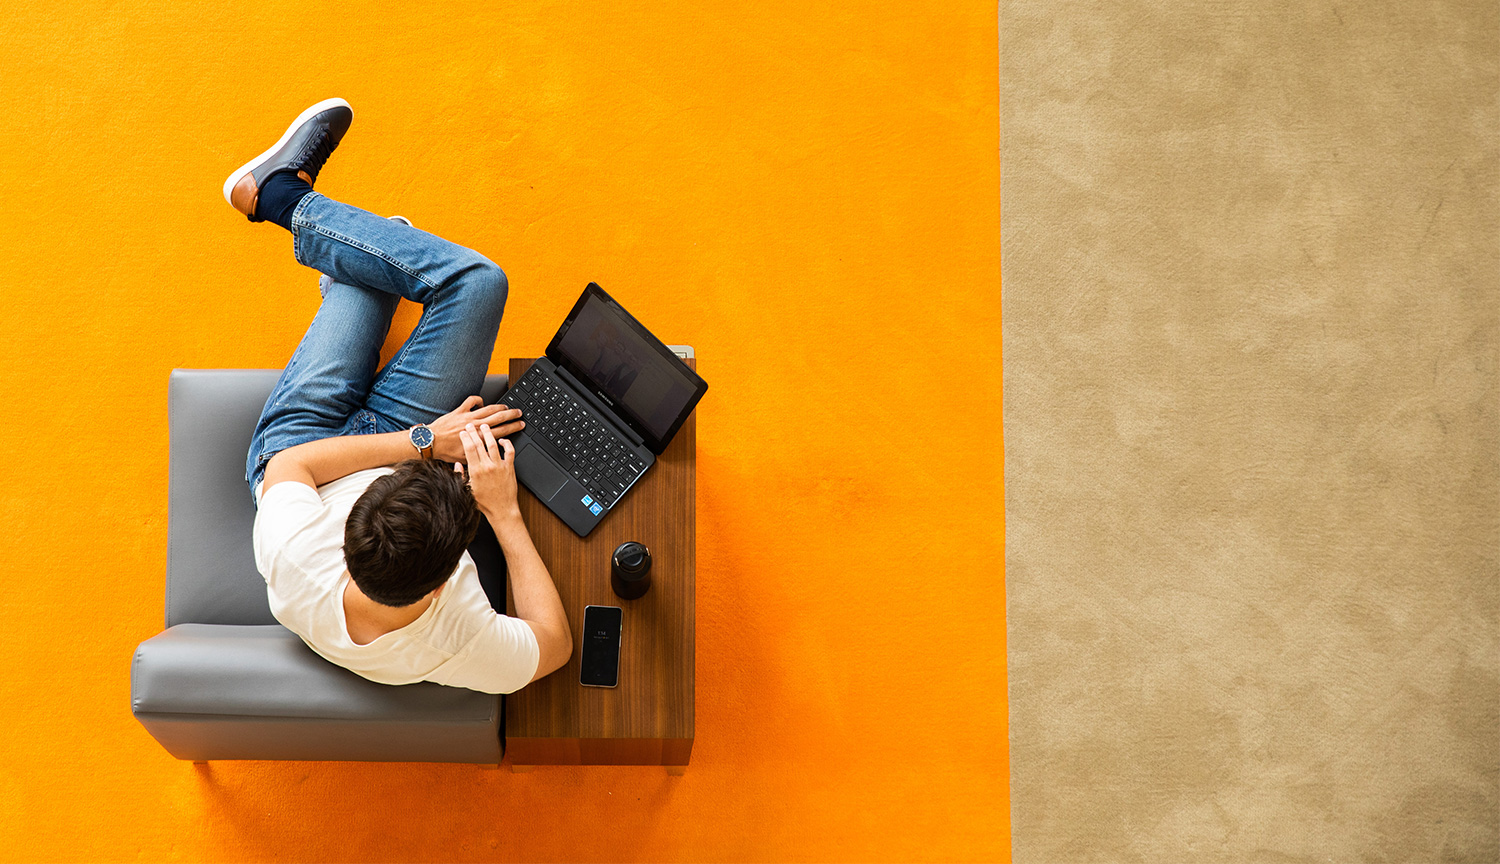 An aerial view of a seated student working on a laptop, situated on top of an orange rug.